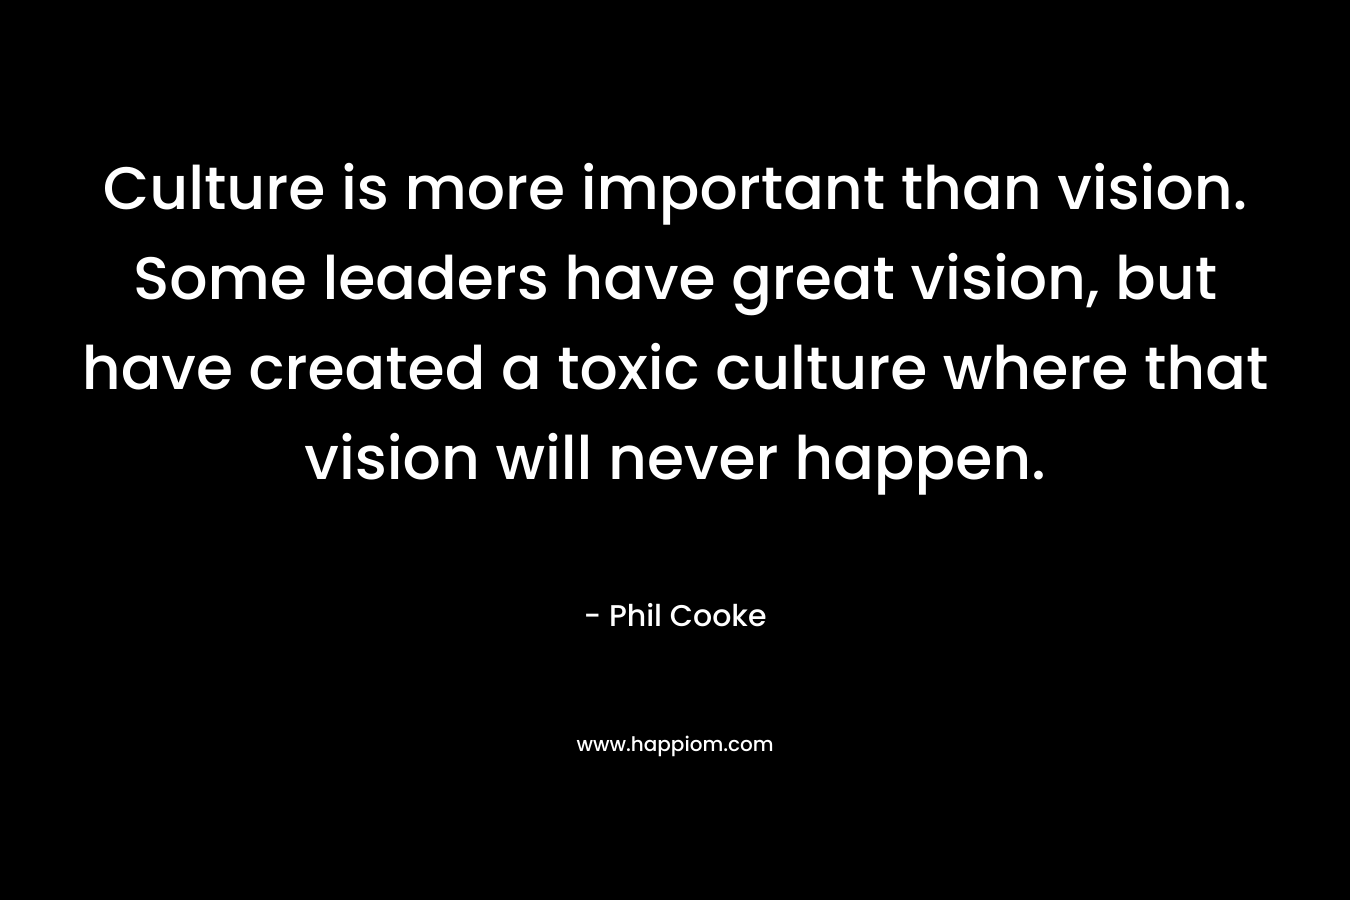 Culture is more important than vision. Some leaders have great vision, but have created a toxic culture where that vision will never happen.